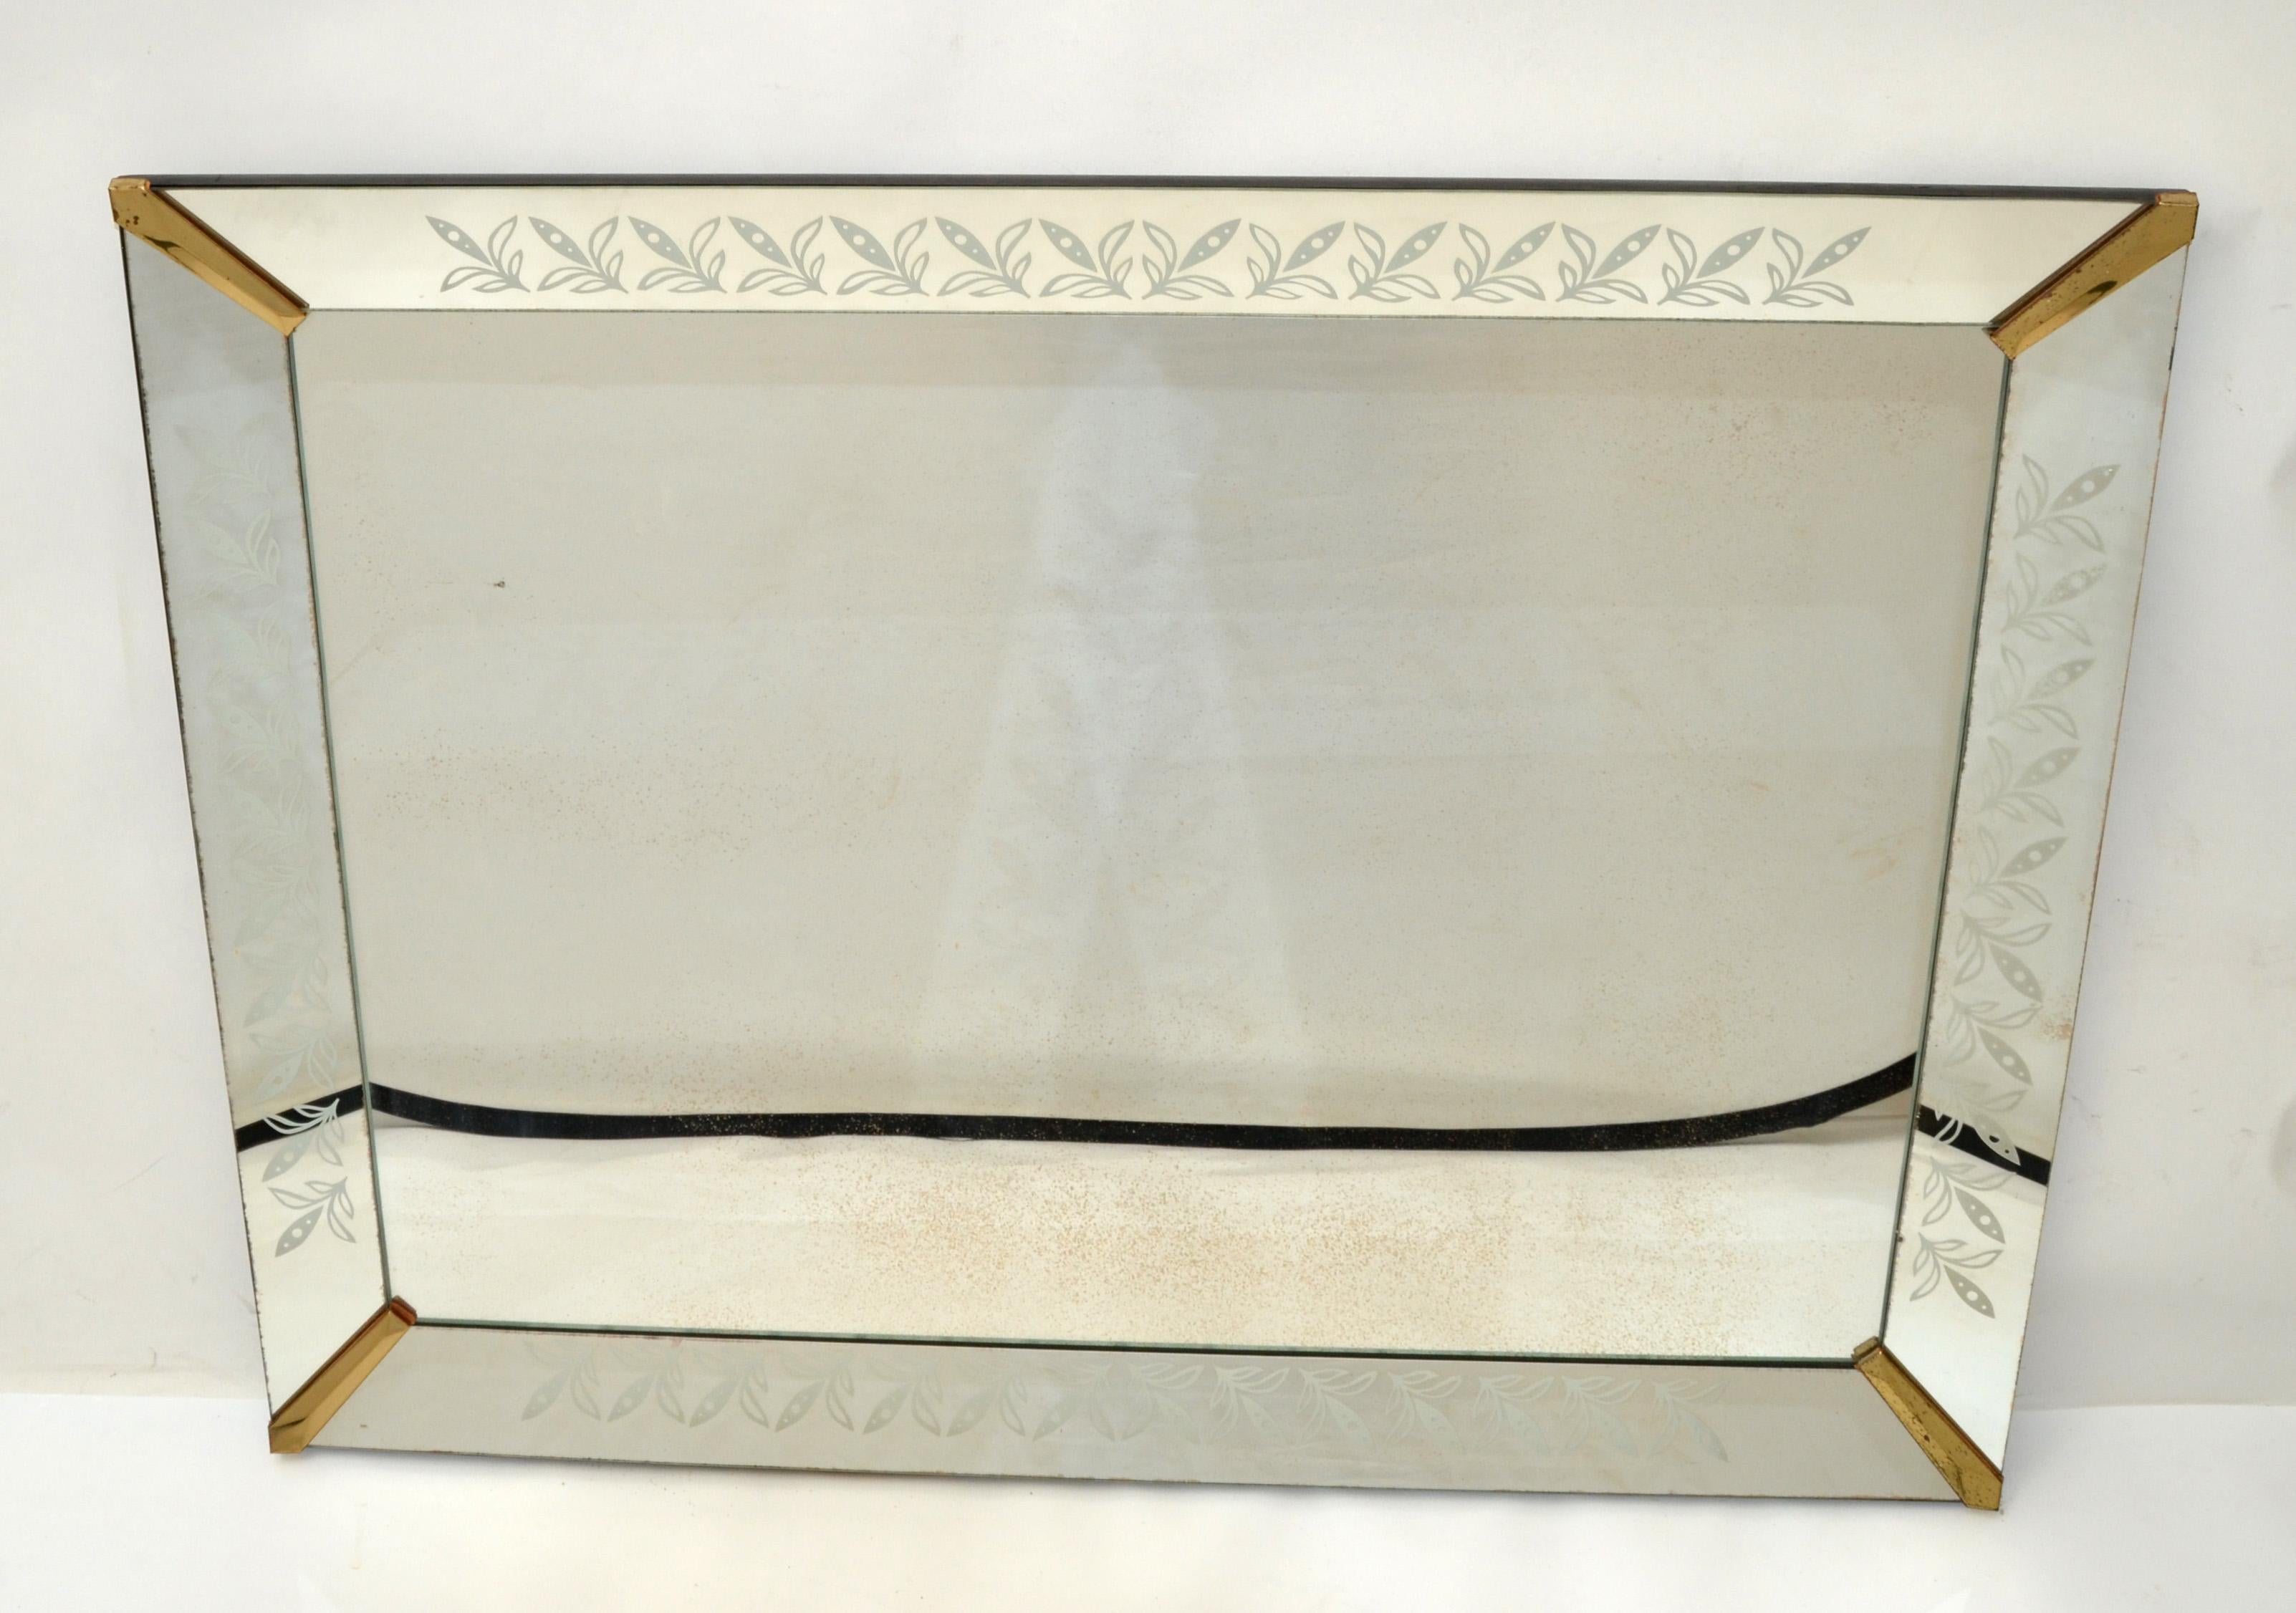 1940s Art Deco Venetian Style Etched Wall Mirror with Brass Finished Corners For Sale 1